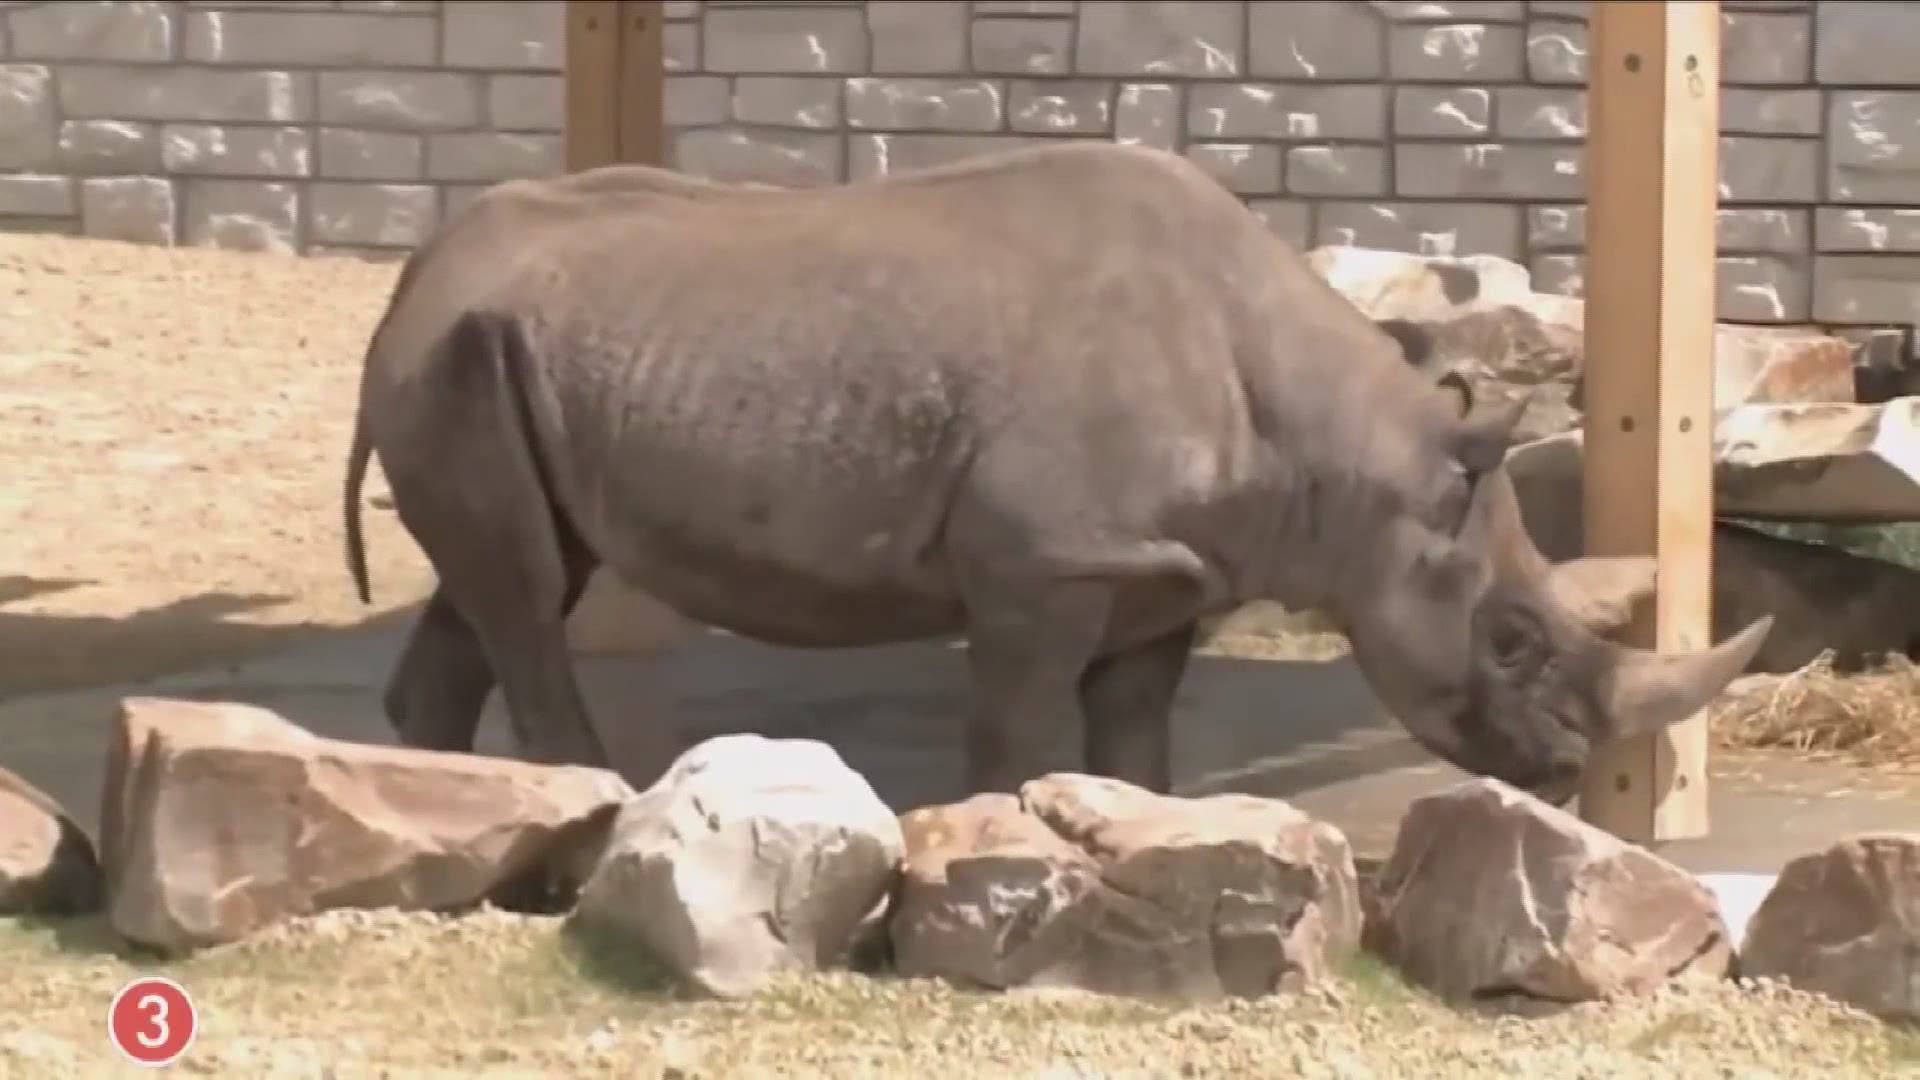 Welcome to the Daniel Maltz Rhino Reserve at the Cleveland Metroparks Zoo. This newly expanded exhibit is more than double the size of the previous rhino habitat.